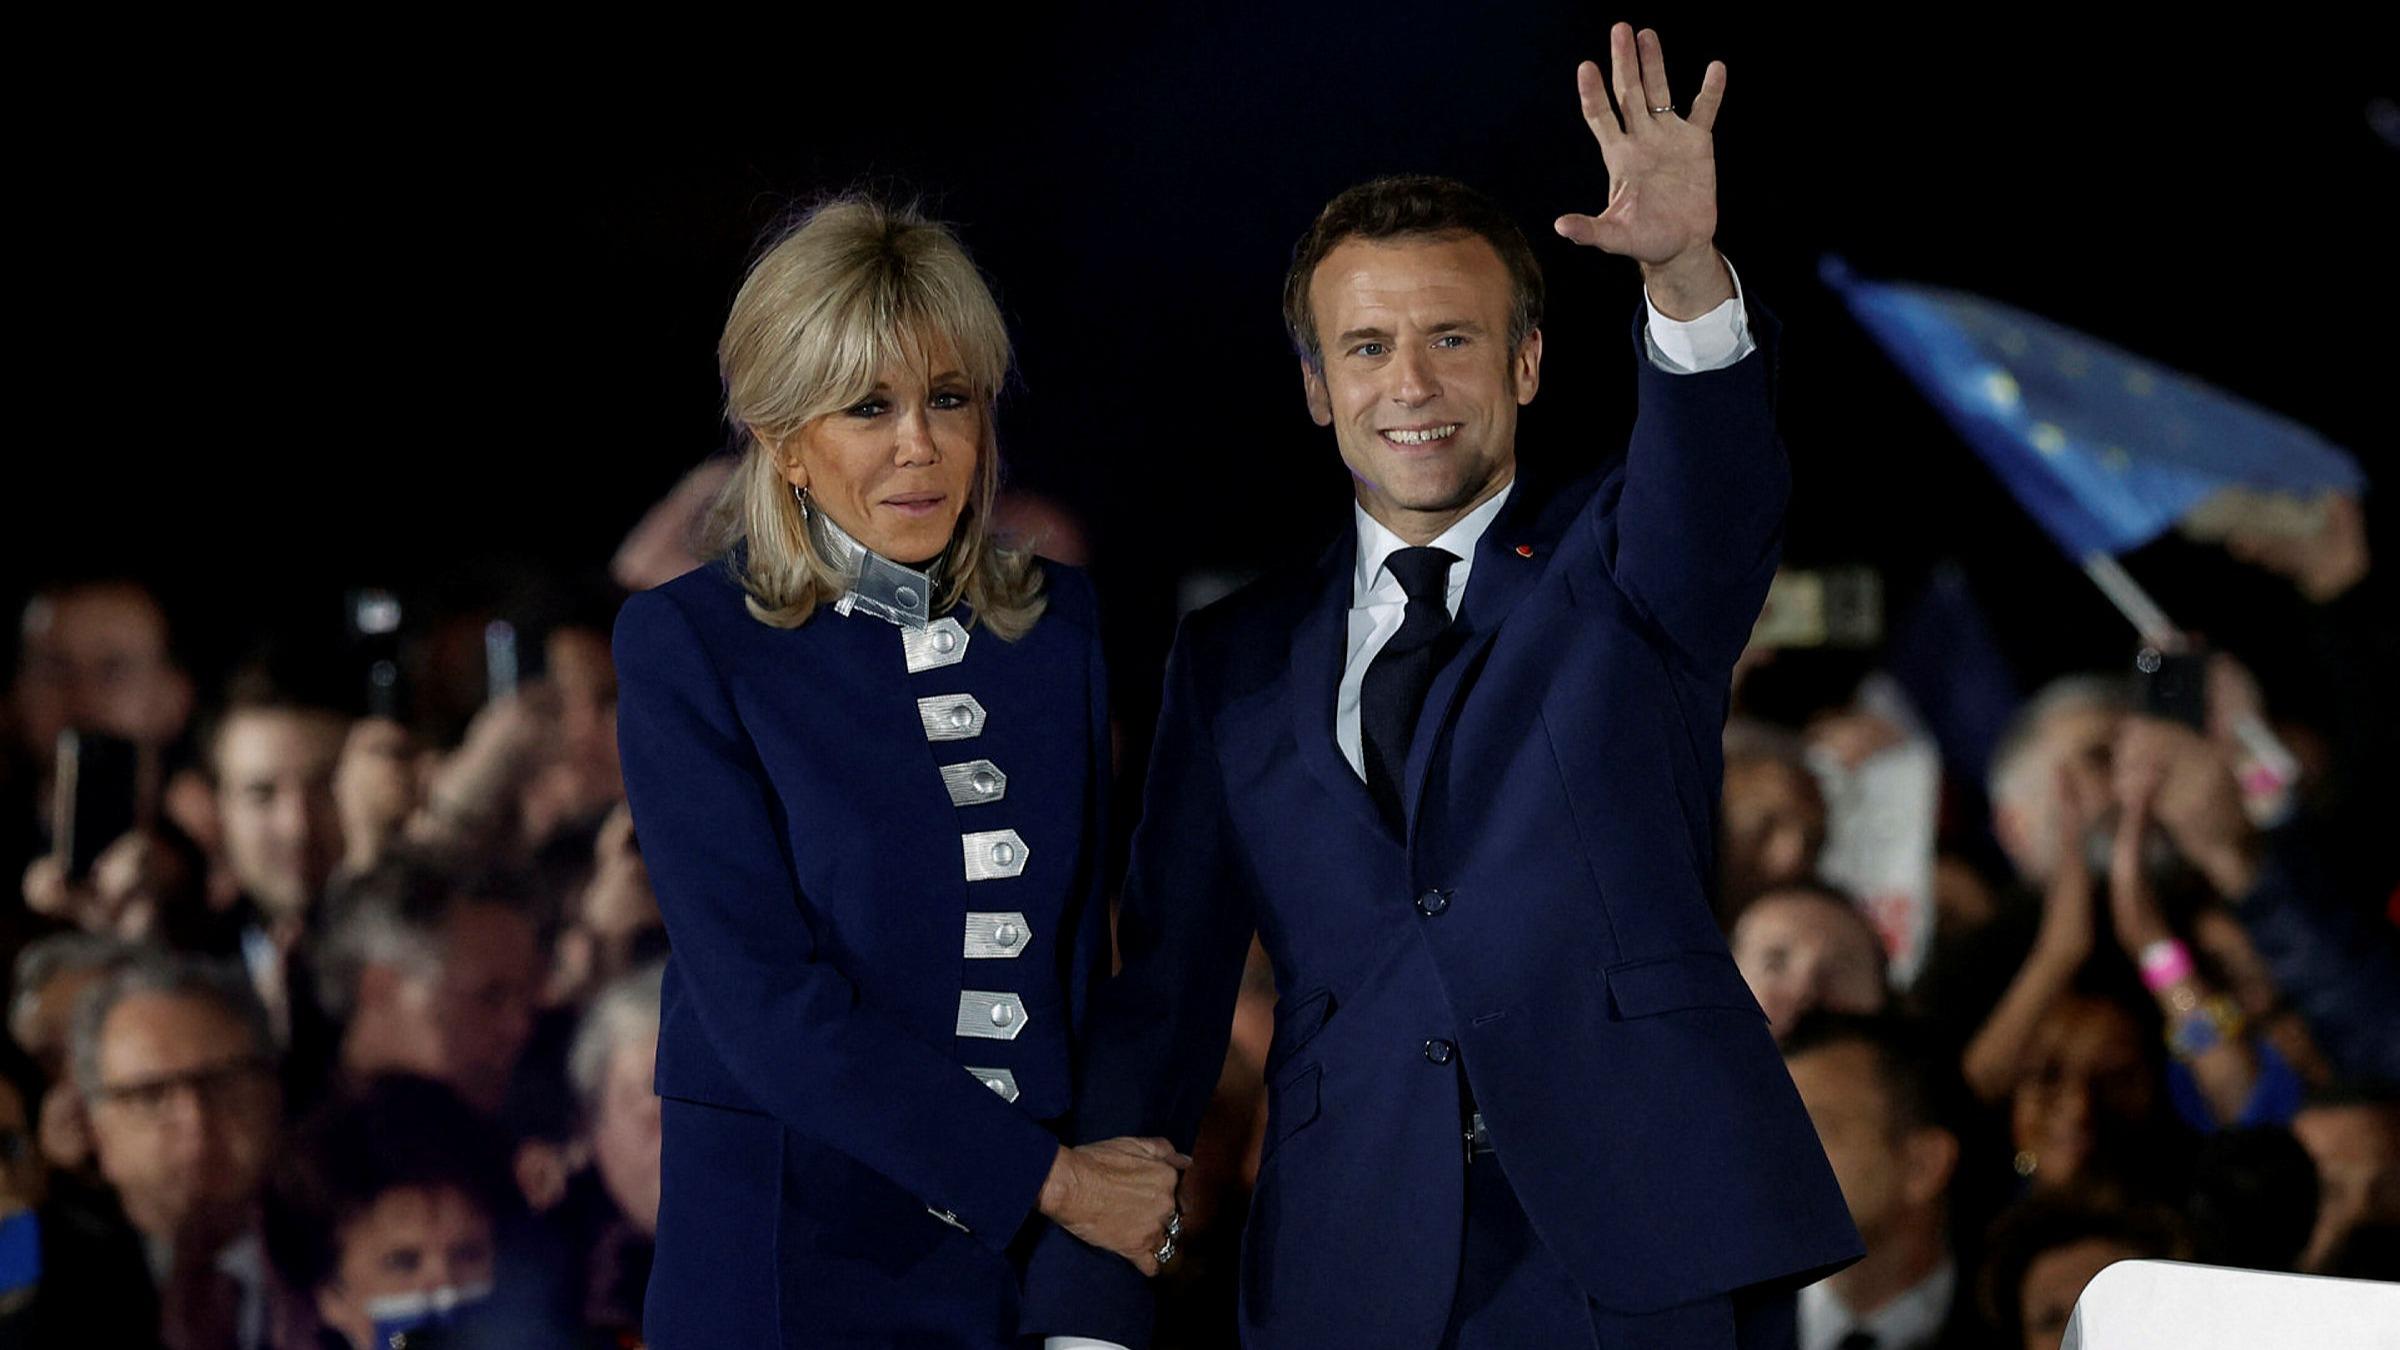 Emmanuel Macron is elected as French President for another term_30.1